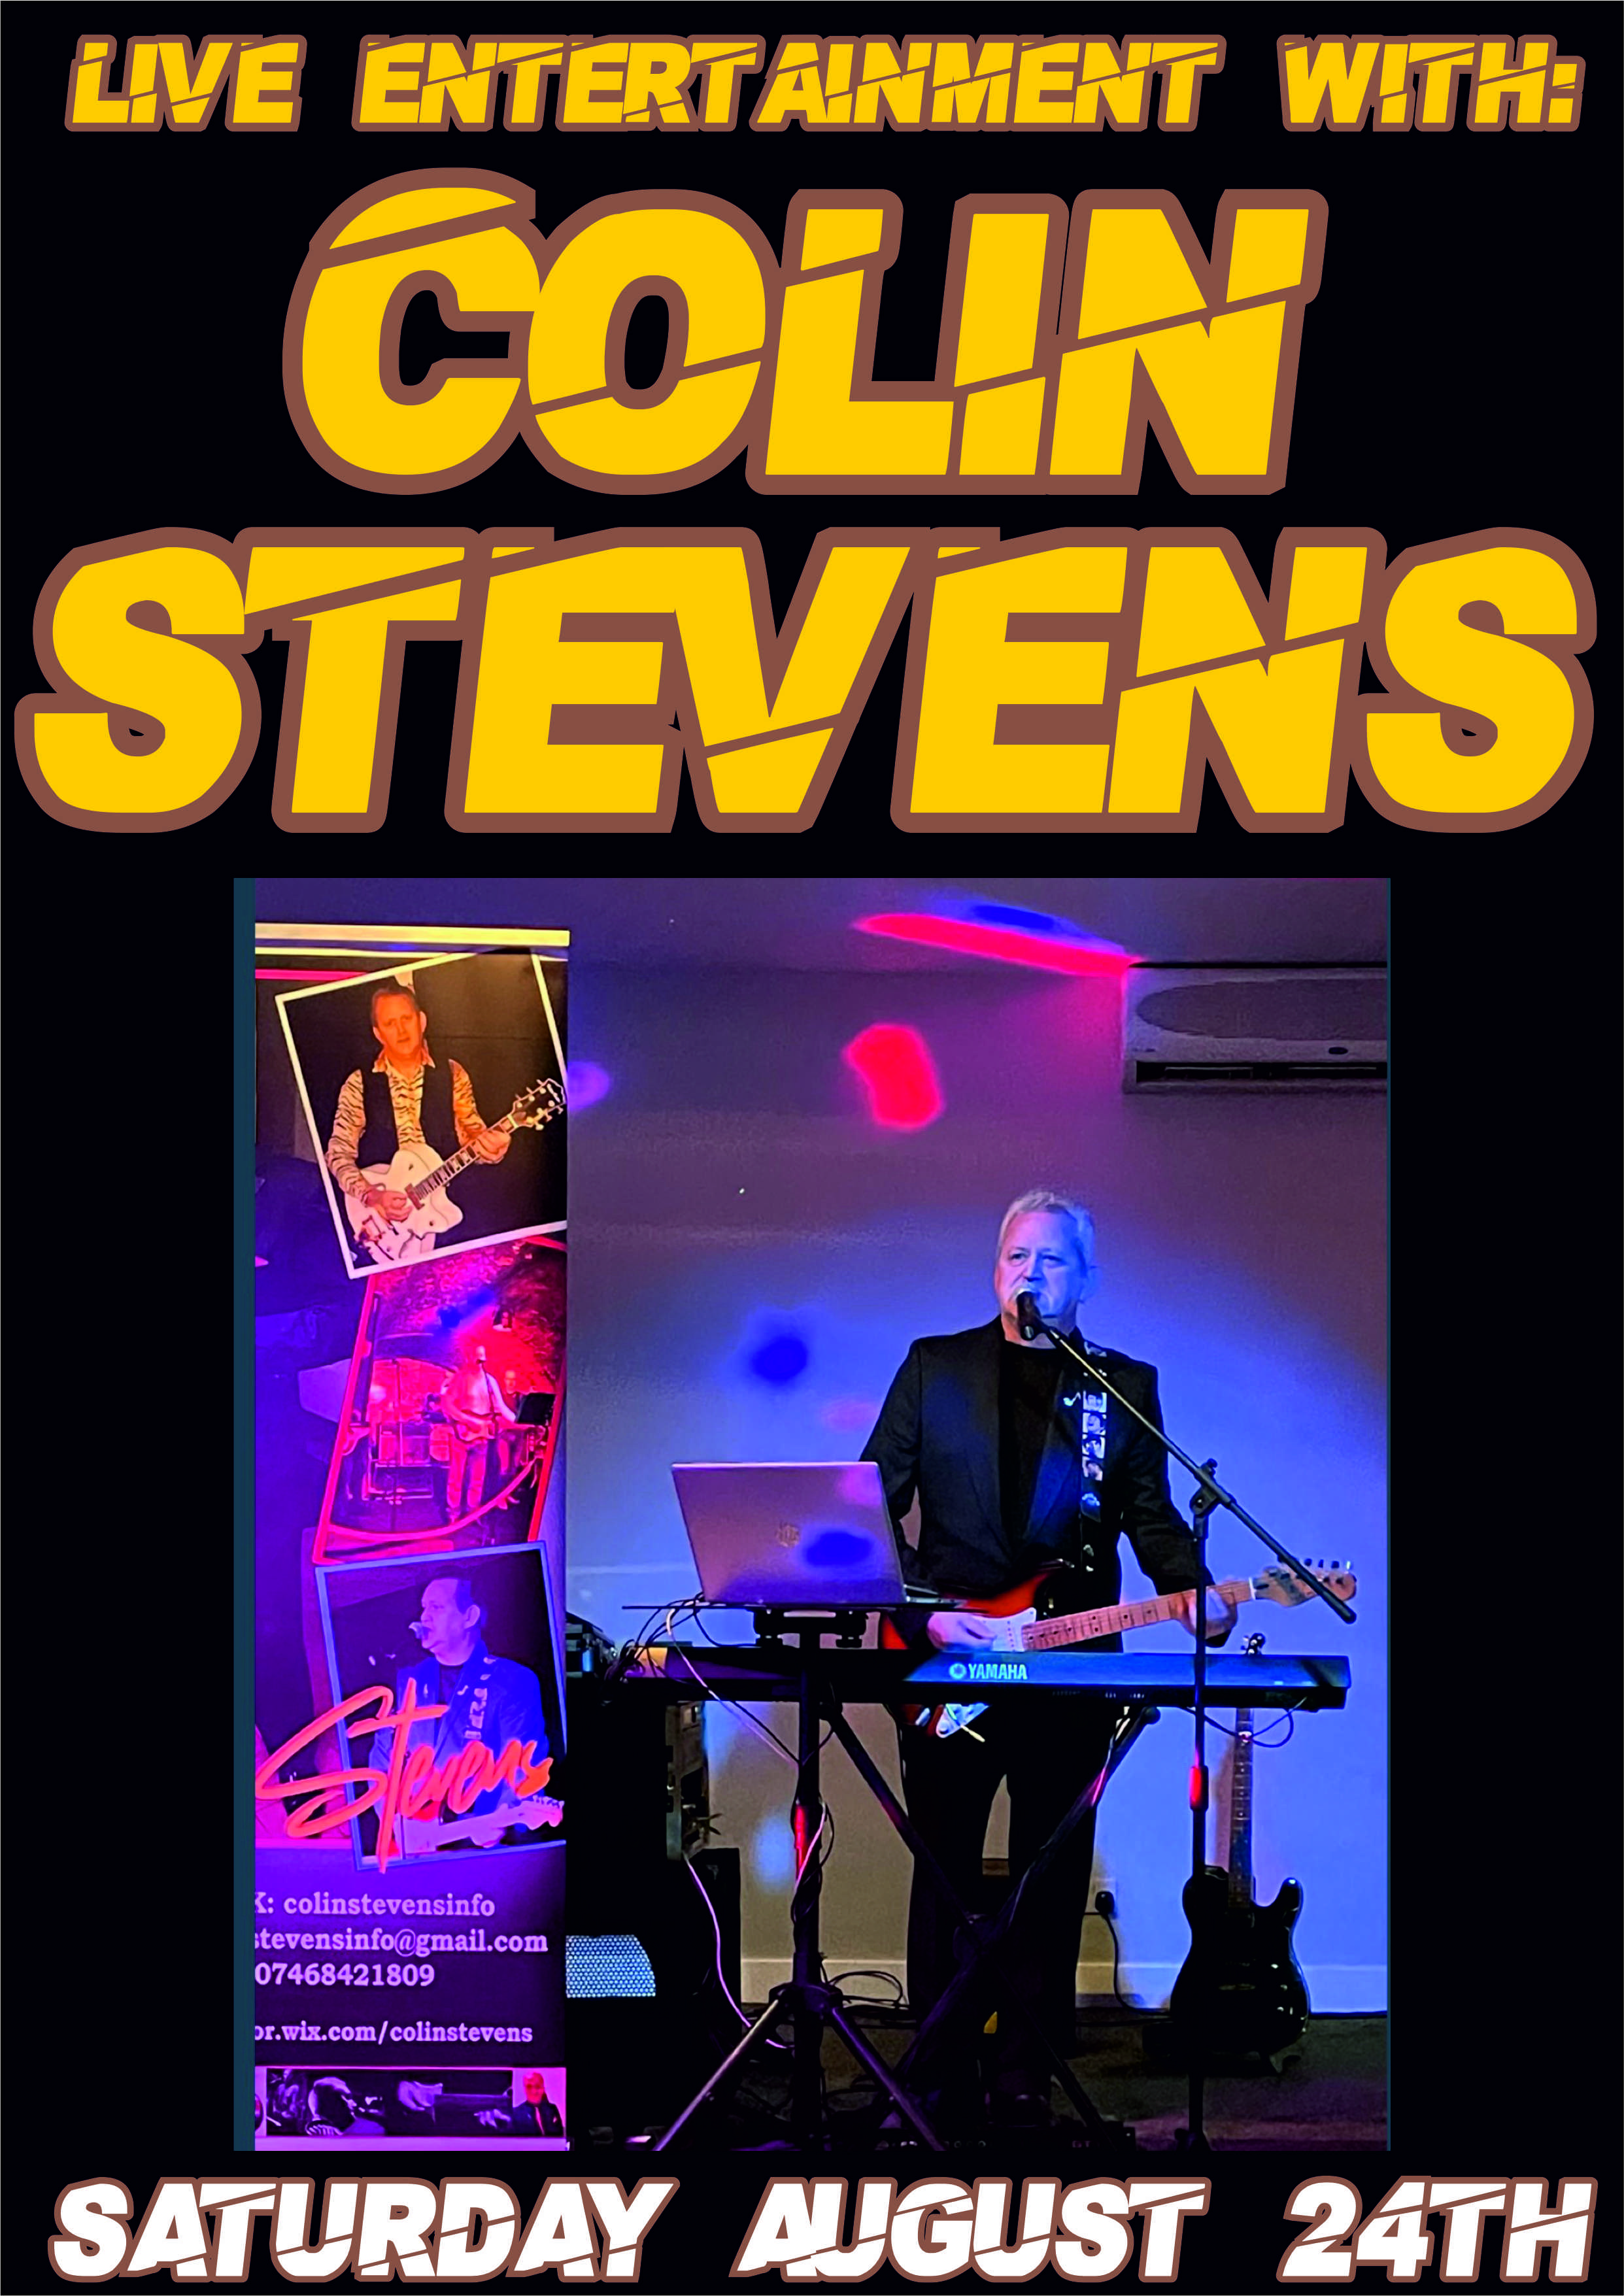 Live Entertainment with Colin Stevens